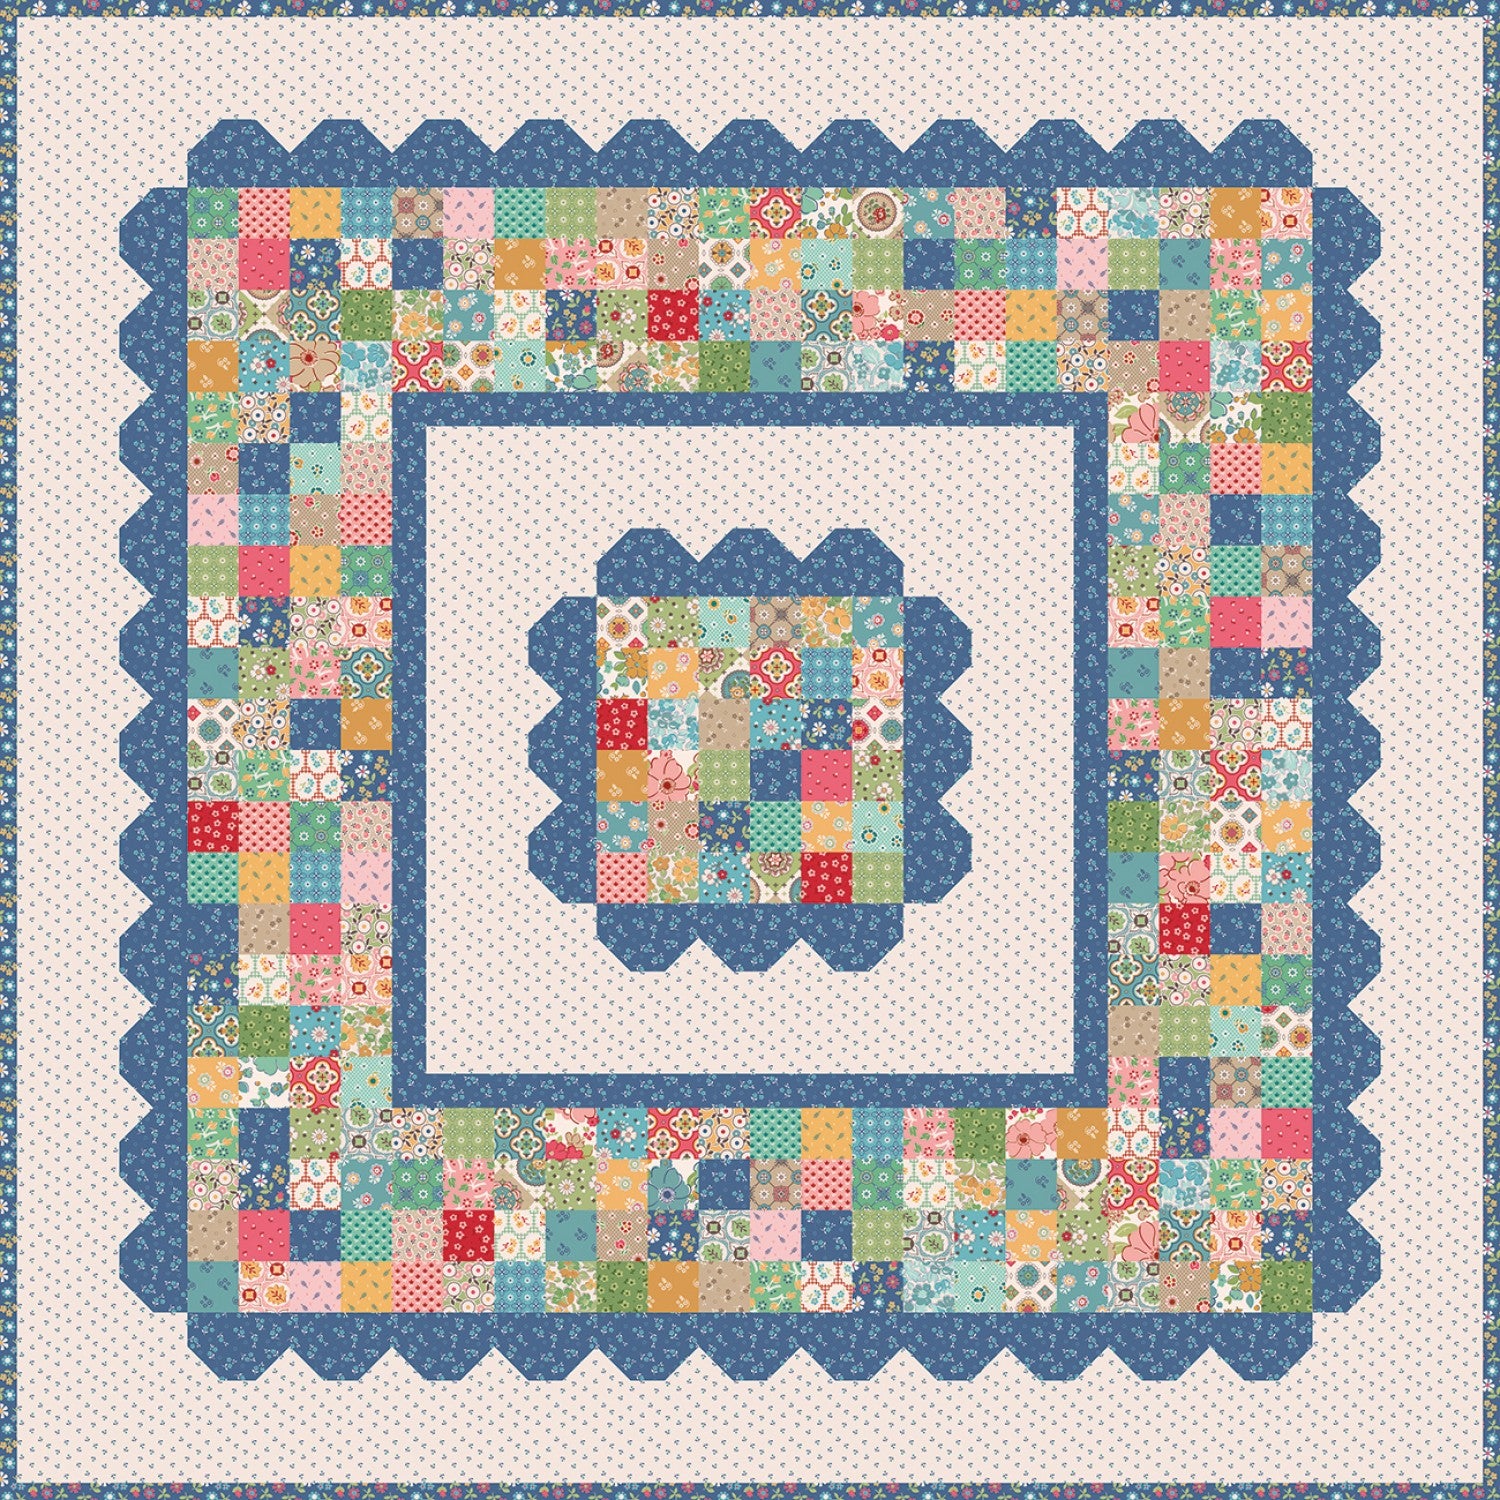 Mercantile Heritage Table Topper Kit by Lori Holt (43" x 43")